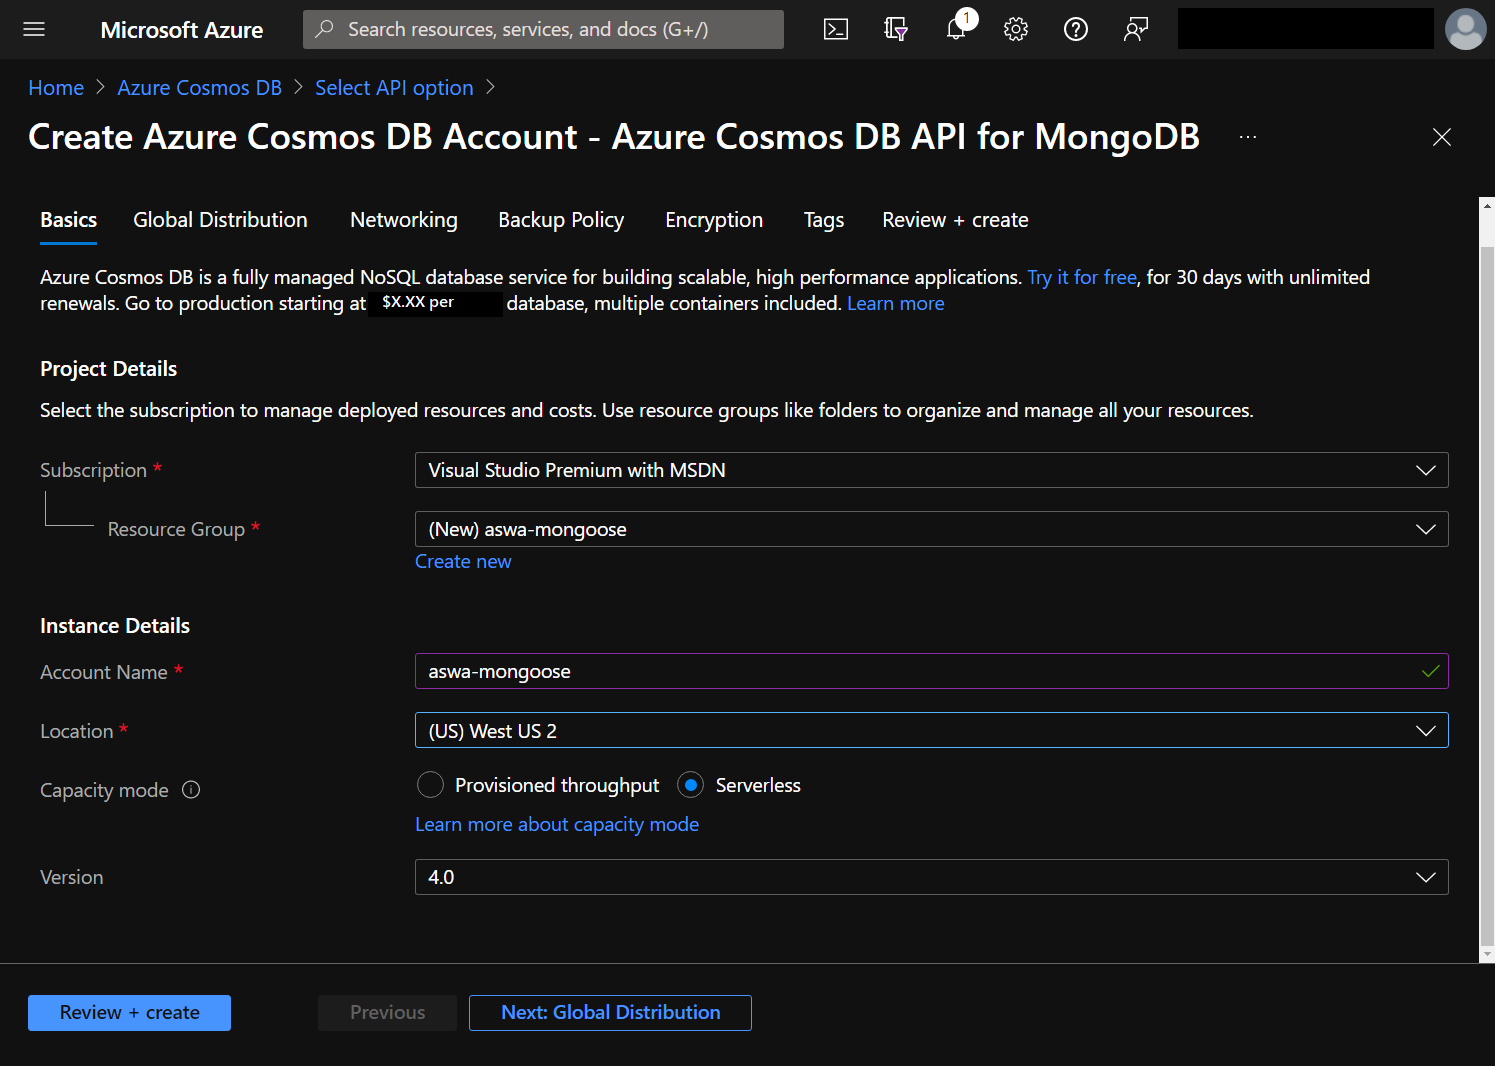 Screenshot showing form for creating new Cosmos DB instance.